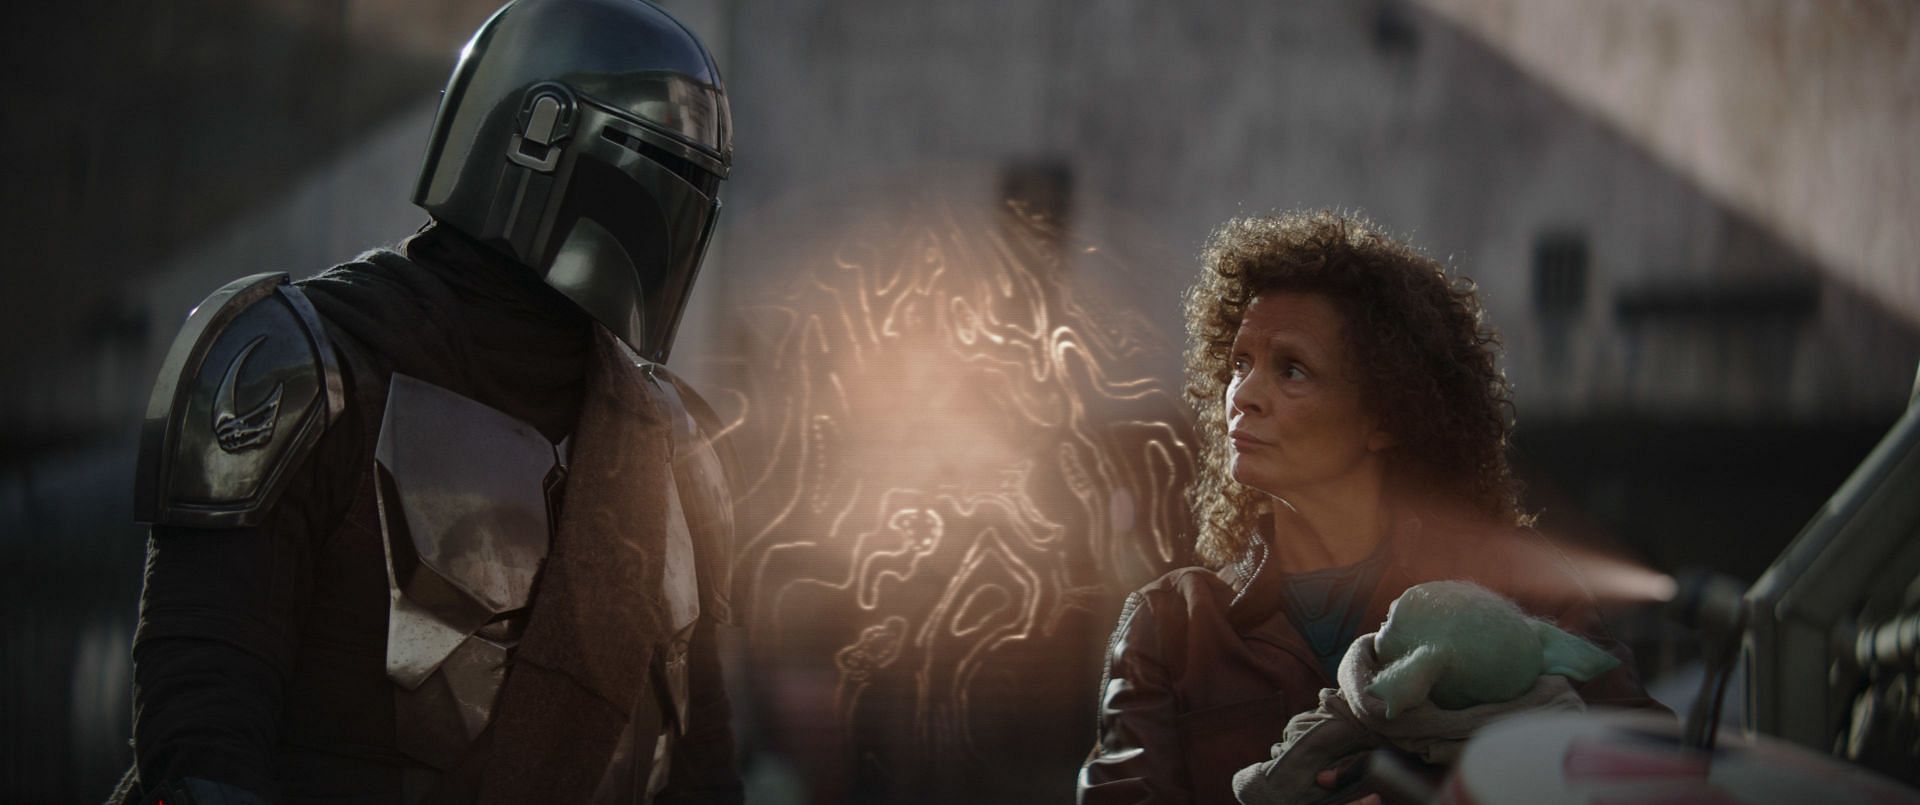 Prepare for Galactic Wonders: The Mandalorian Season 4 - What can fans expect from this thrilling new chapter? (Image via Lucasfilm)